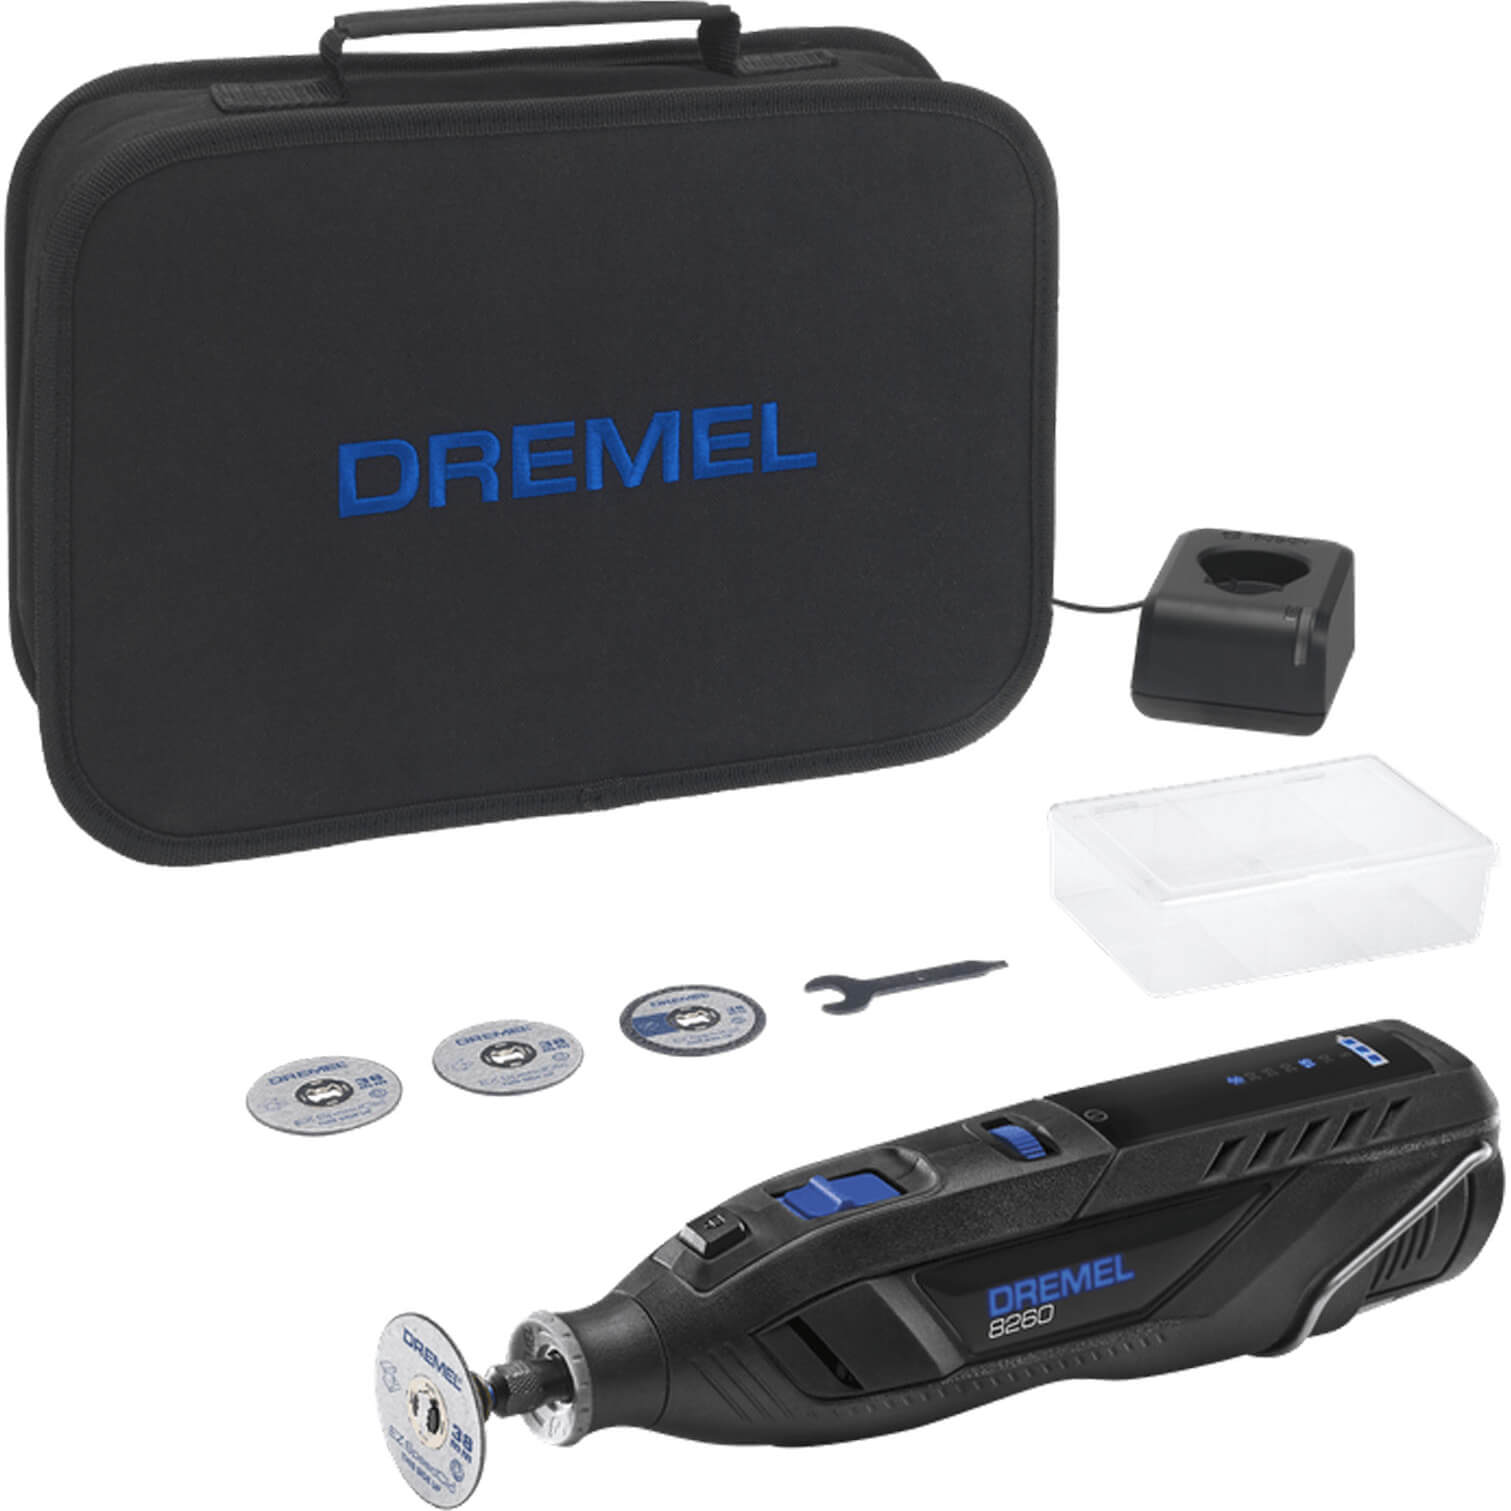 Image of Dremel 8260 12v Cordless Brushless Rotary Multi Tool and 5 Accessories 1 x 3ah Li-ion Charger Case